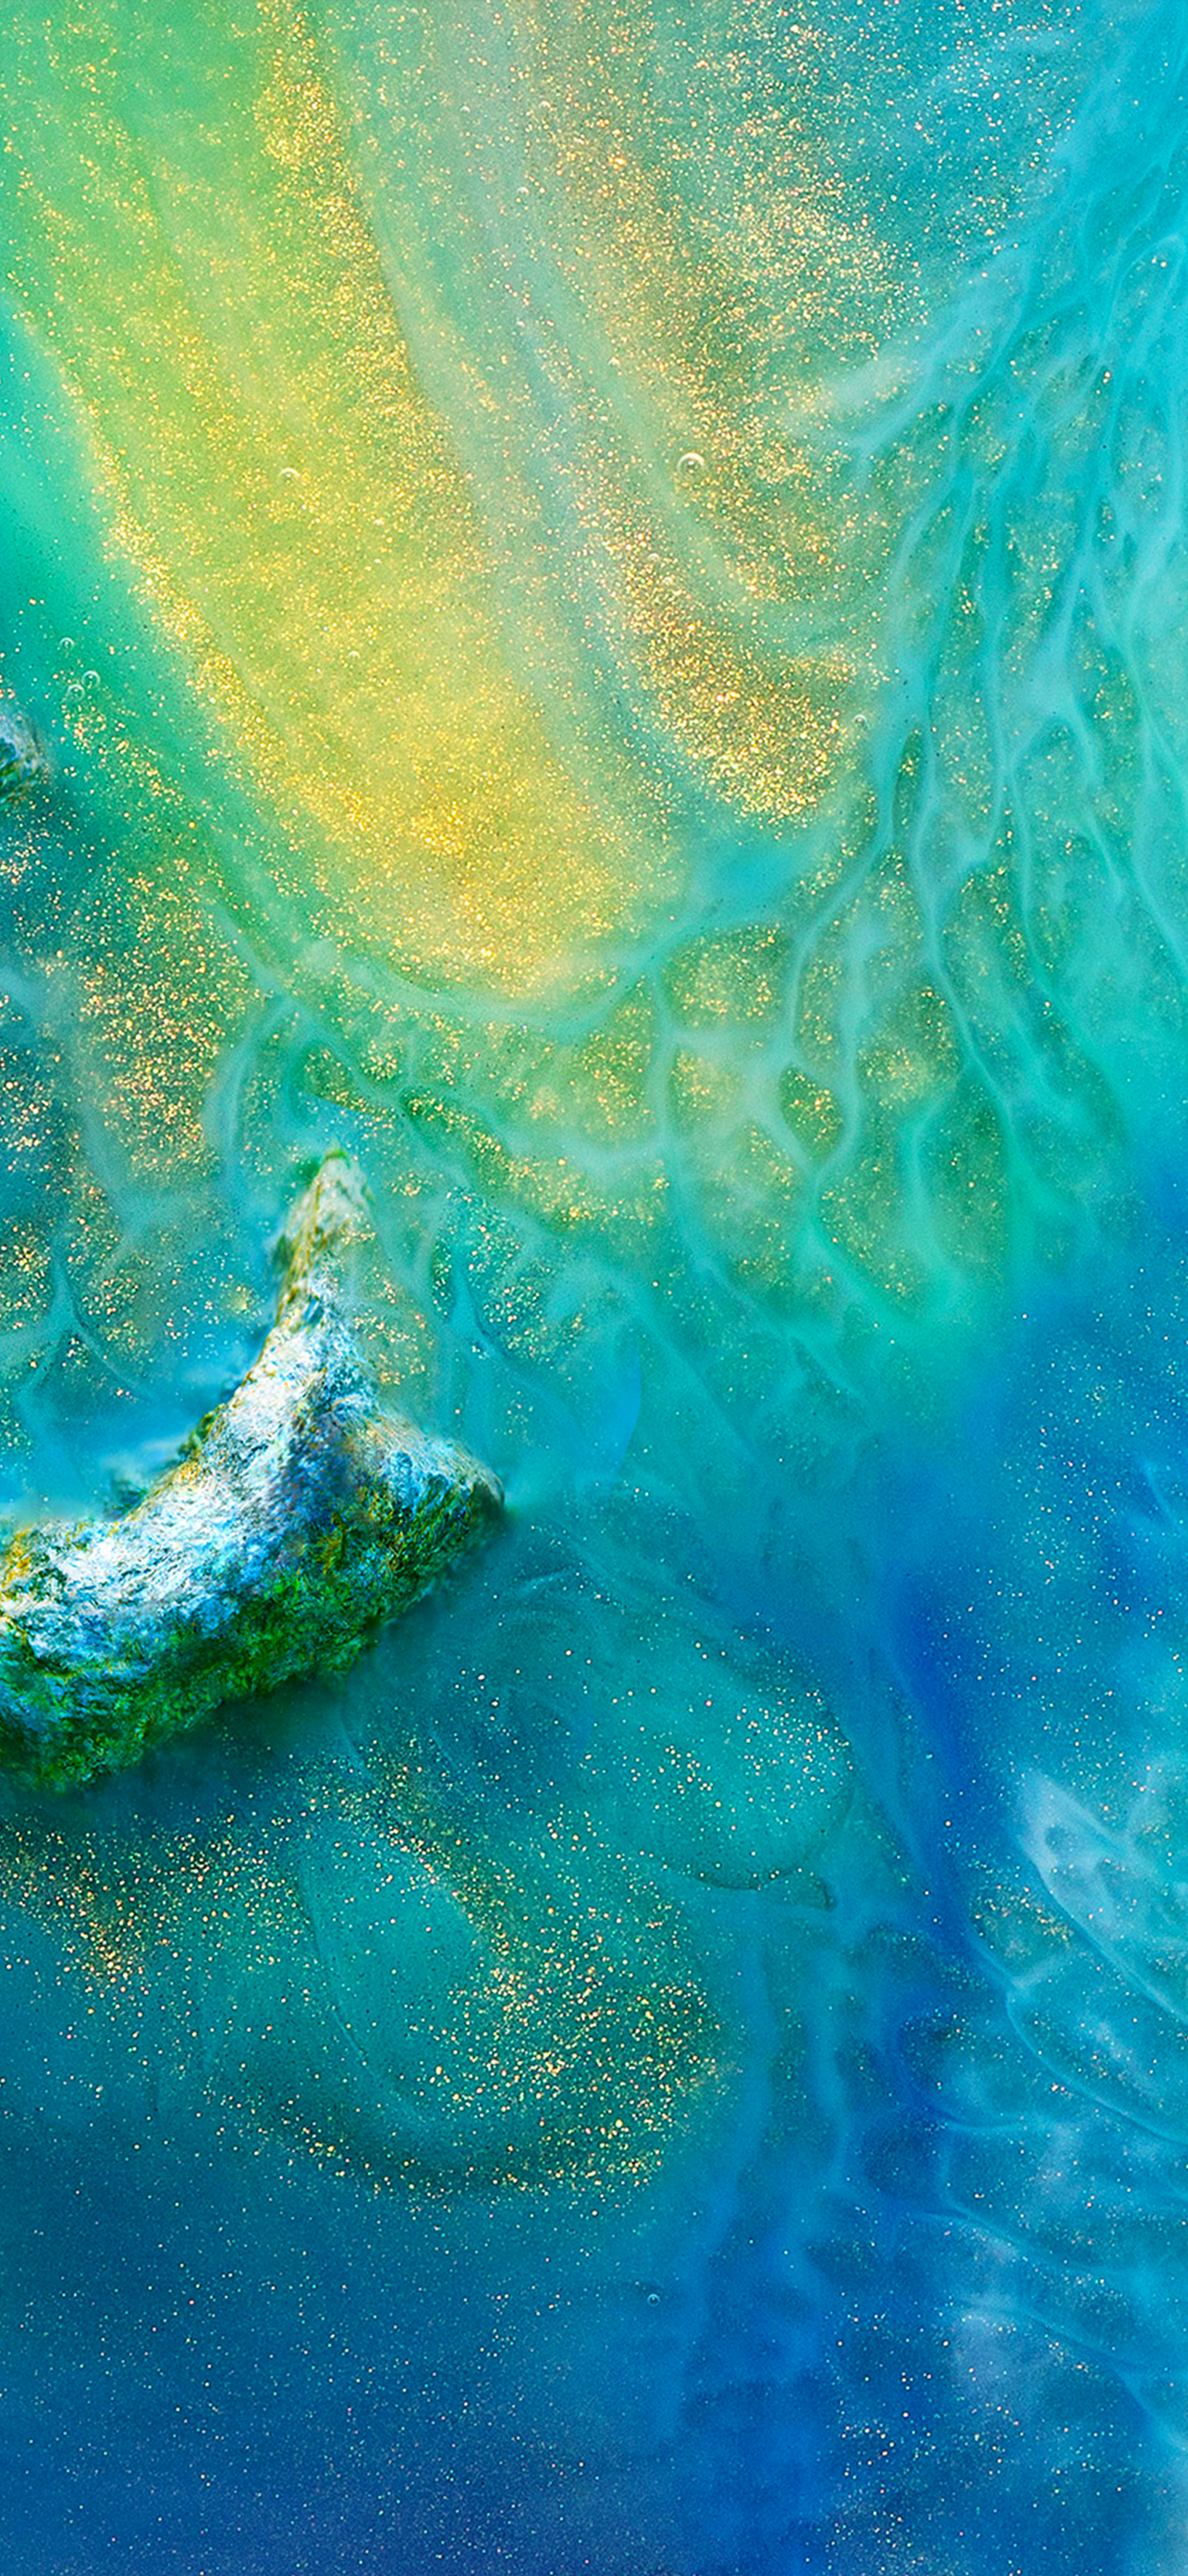 Huawei P20 Mate Pro Stock Wallpaper - Wallpapers Central